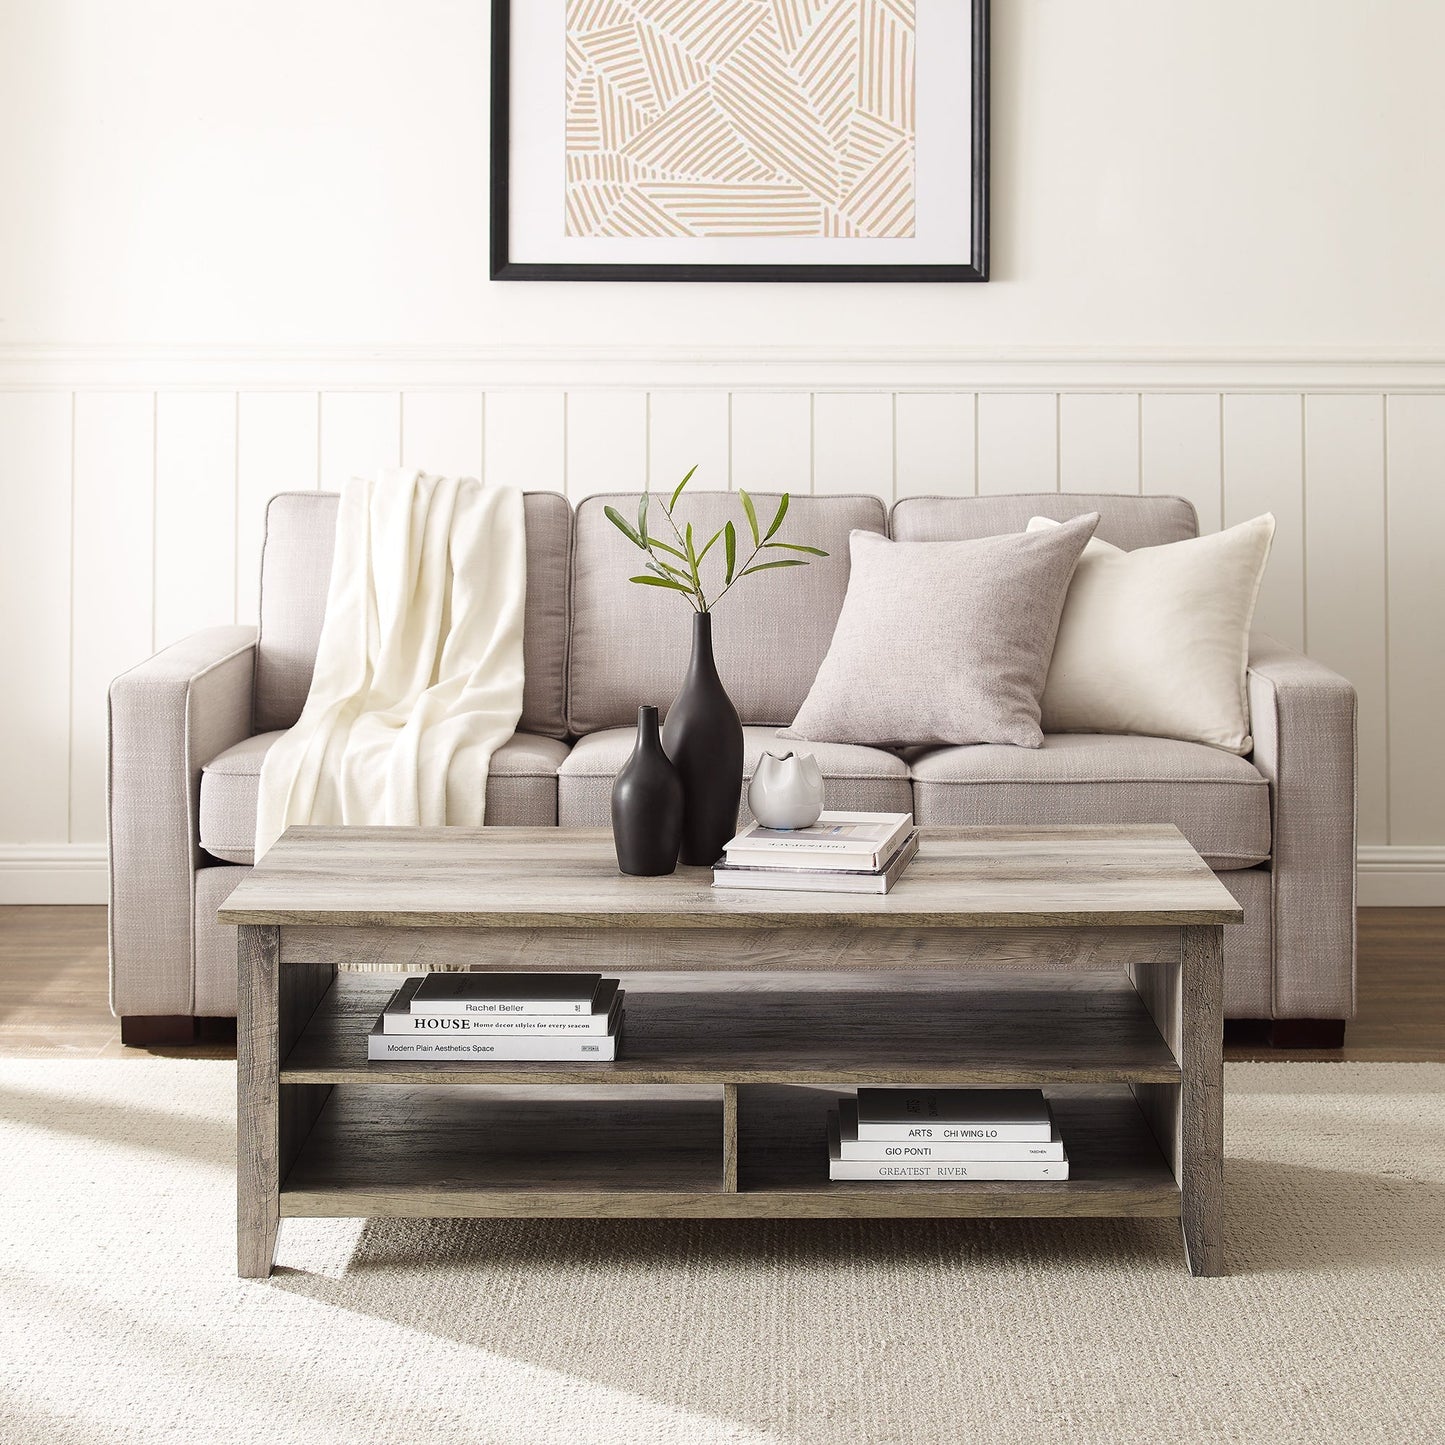 Groove Coastal Grooved Panel Coffee Table with Lower Shelf